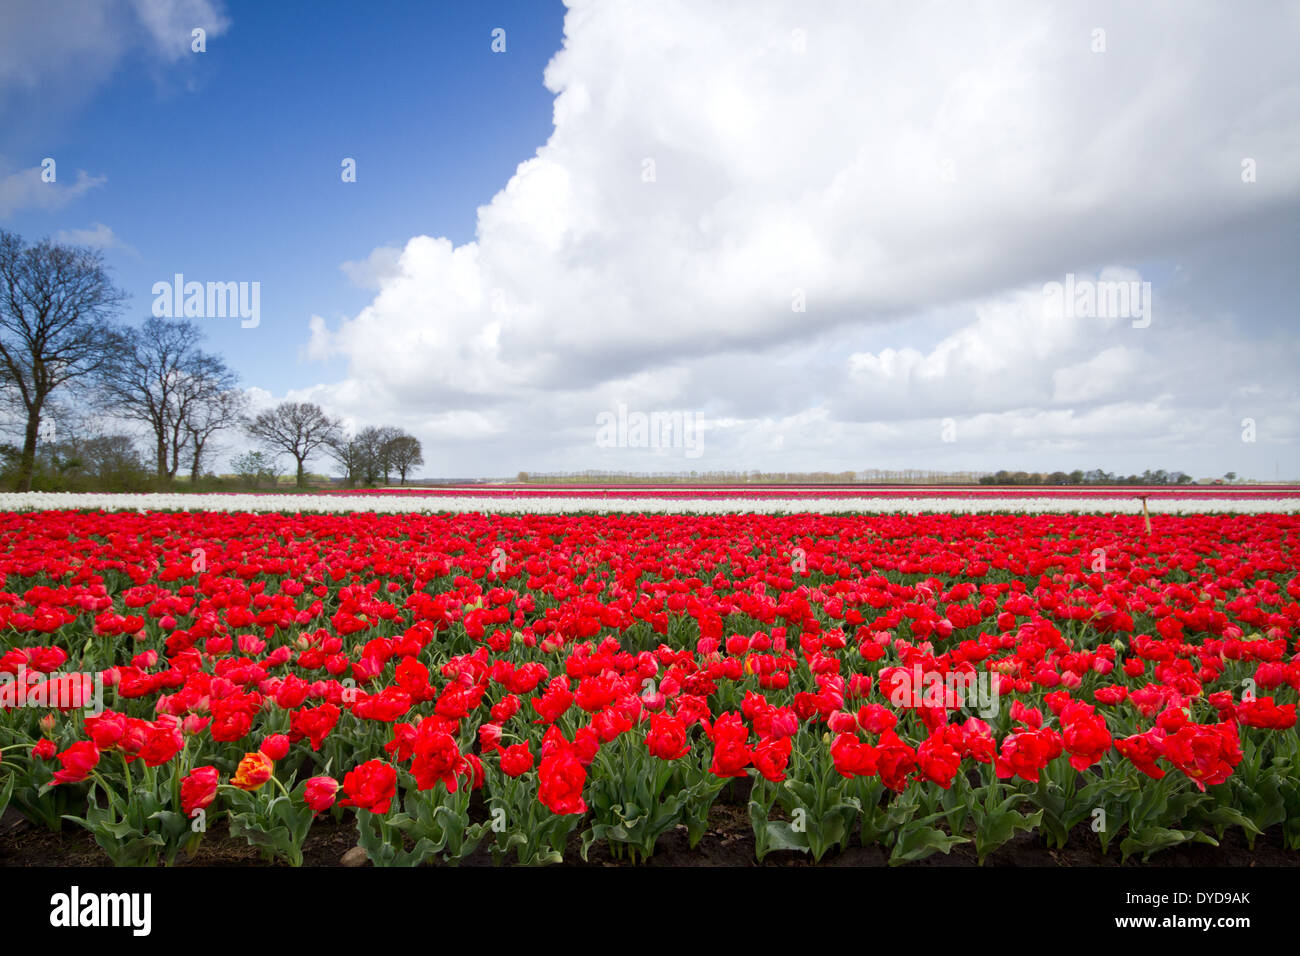 Field with red and white Tulips under a blue sky with white clouds Stock Photo